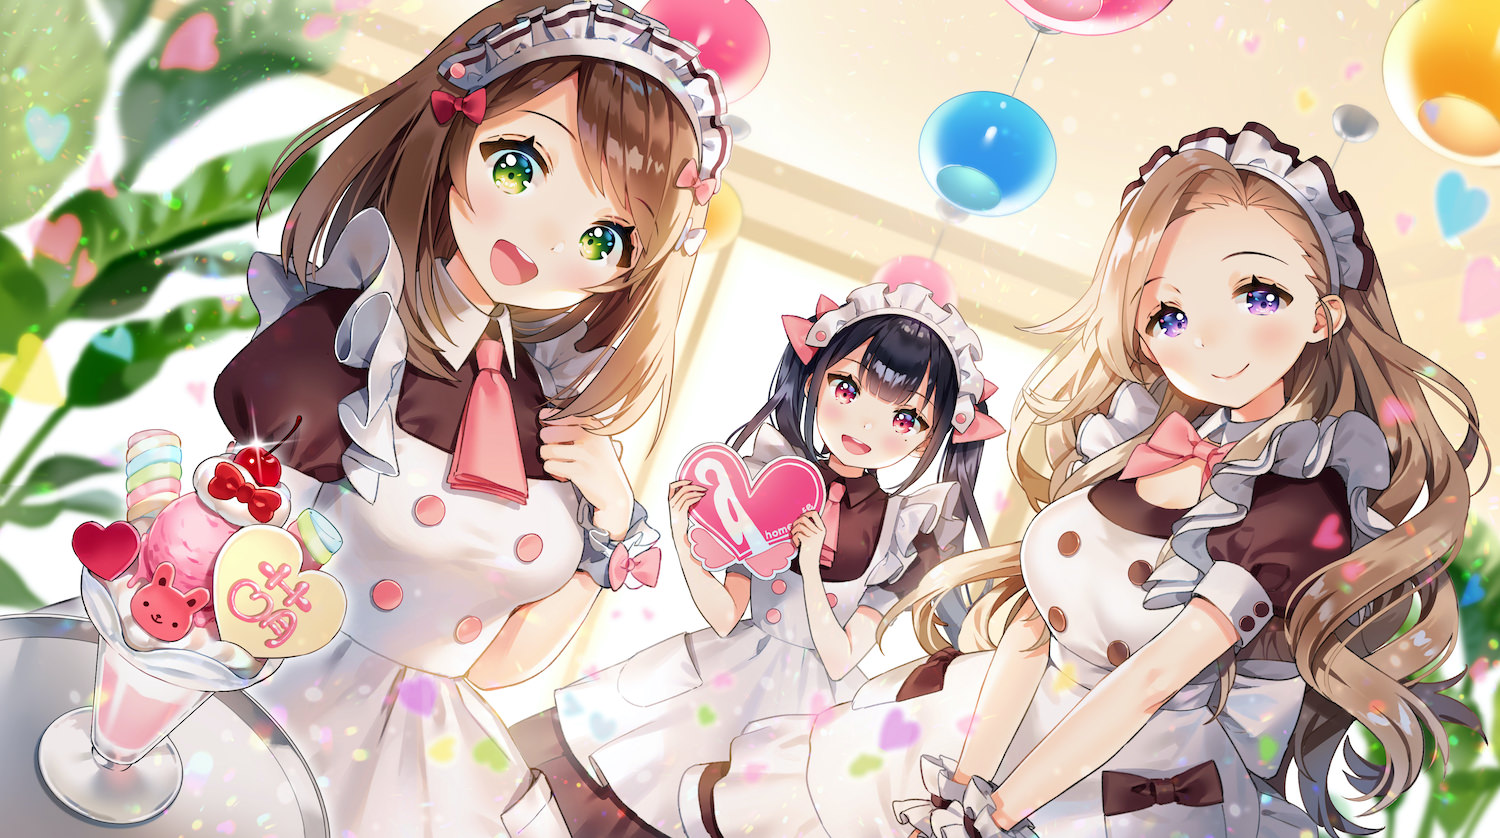 Virtual @Home Café lets you chat with cute virtual maids at home! 